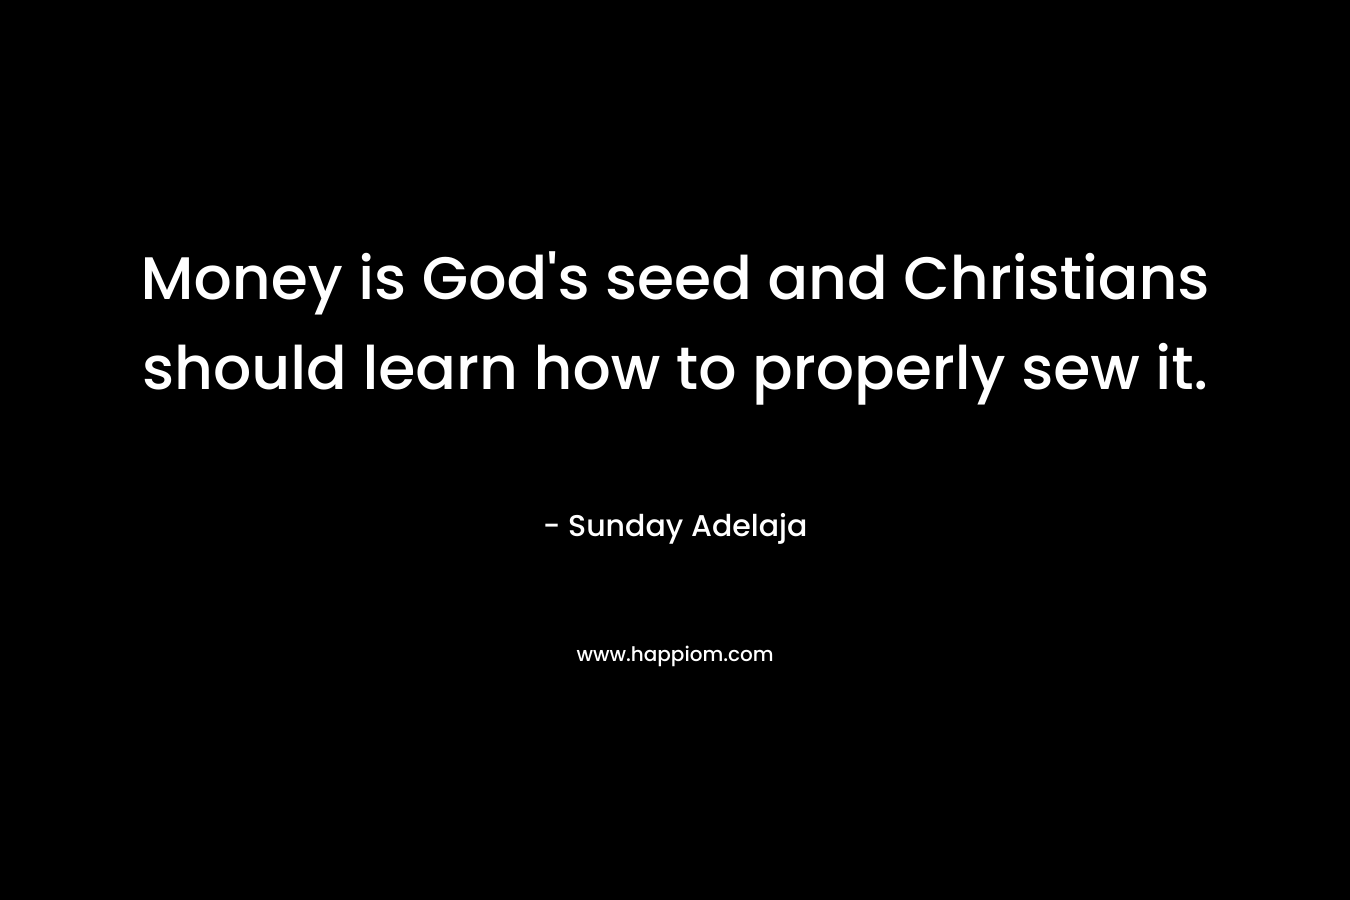 Money is God's seed and Christians should learn how to properly sew it.